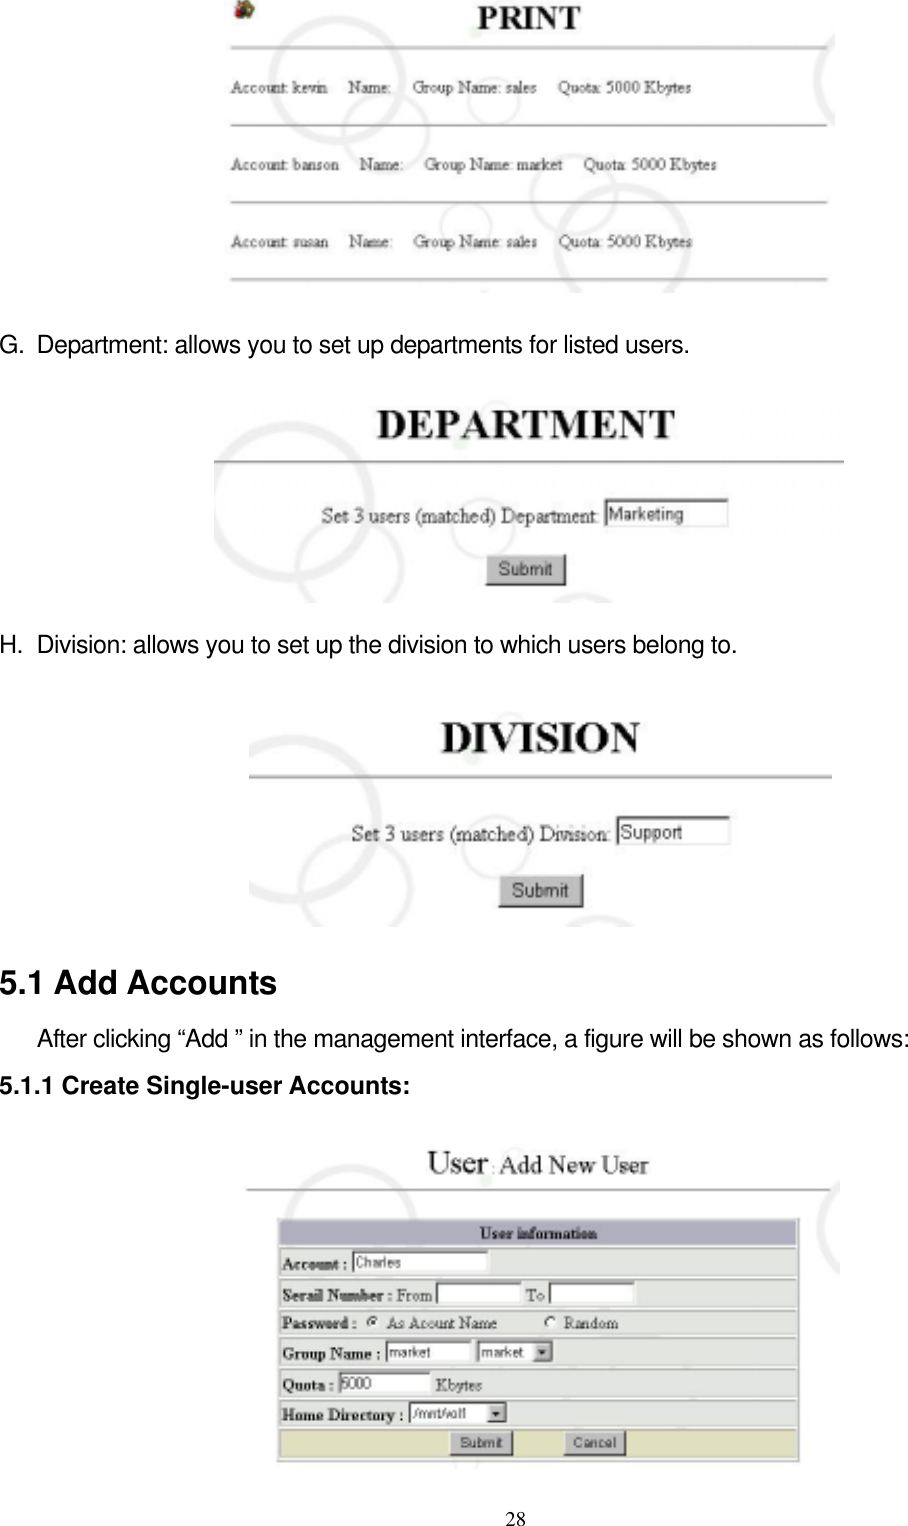  28 G.  Department: allows you to set up departments for listed users.  H.  Division: allows you to set up the division to which users belong to.  5.1 Add Accounts       After clicking “Add ” in the management interface, a figure will be shown as follows: 5.1.1 Create Single-user Accounts:  